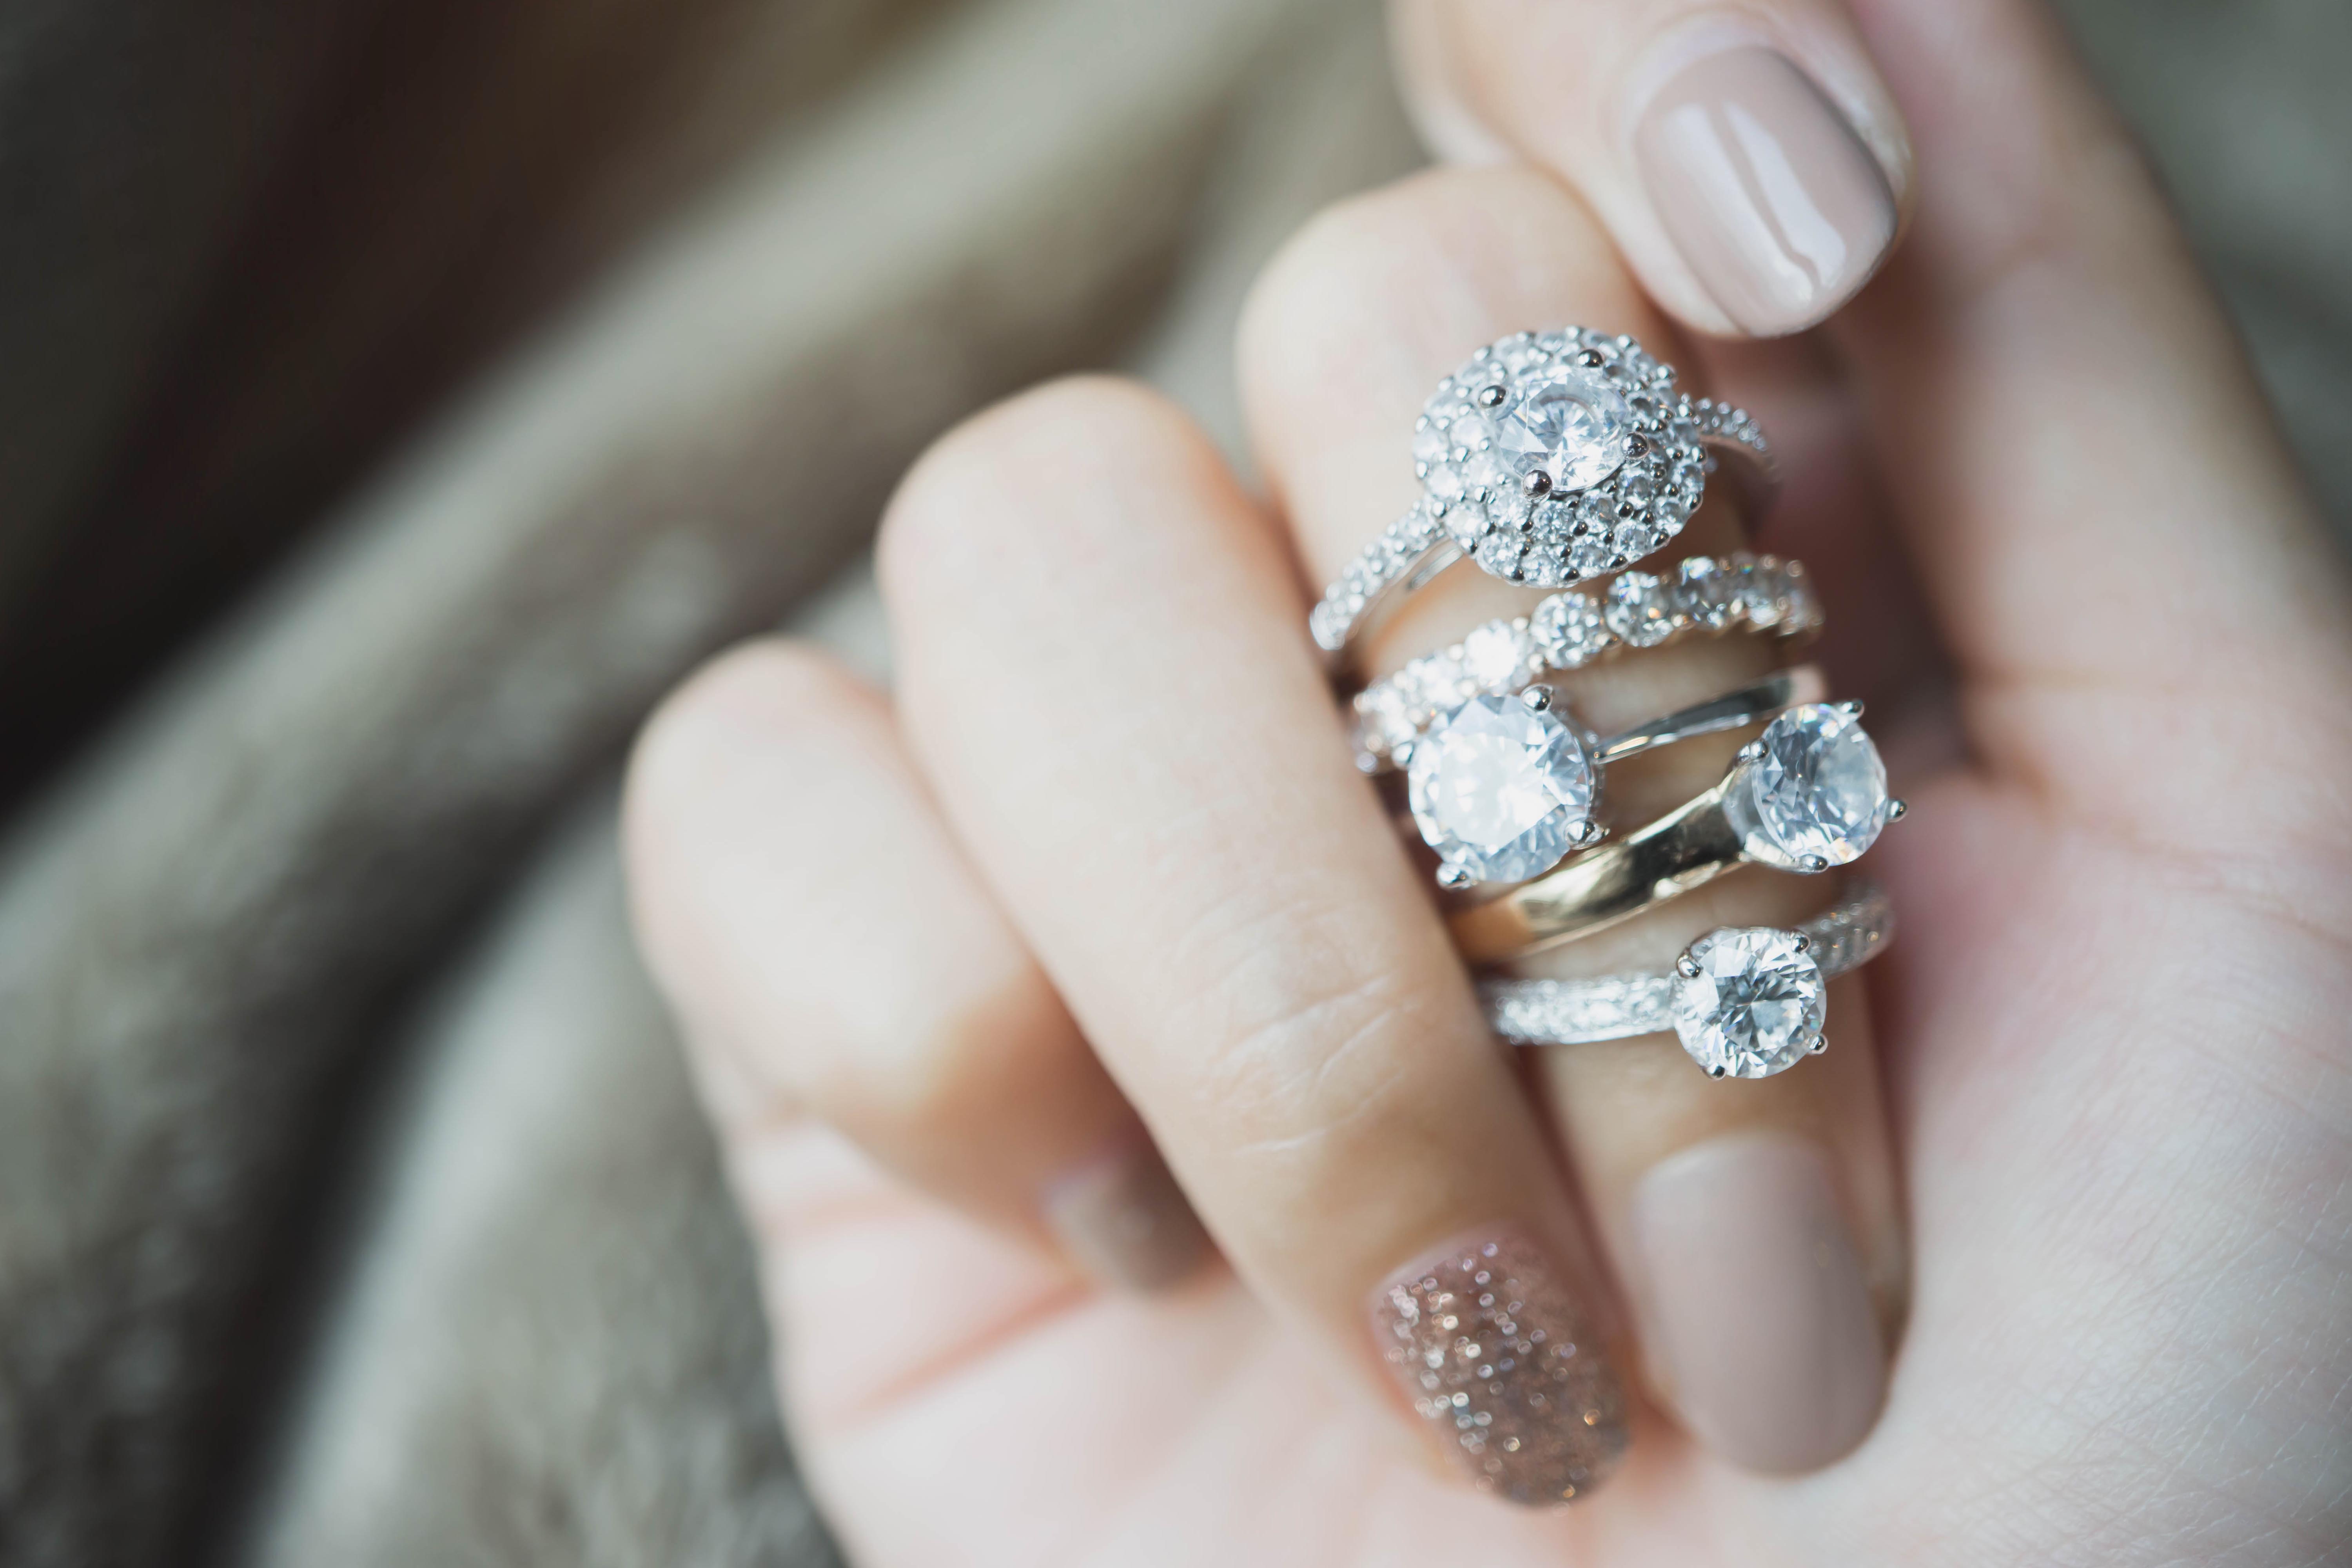 A Royal Engagement Ring - Meghan Markle's Style | McCaskill & Company Blog